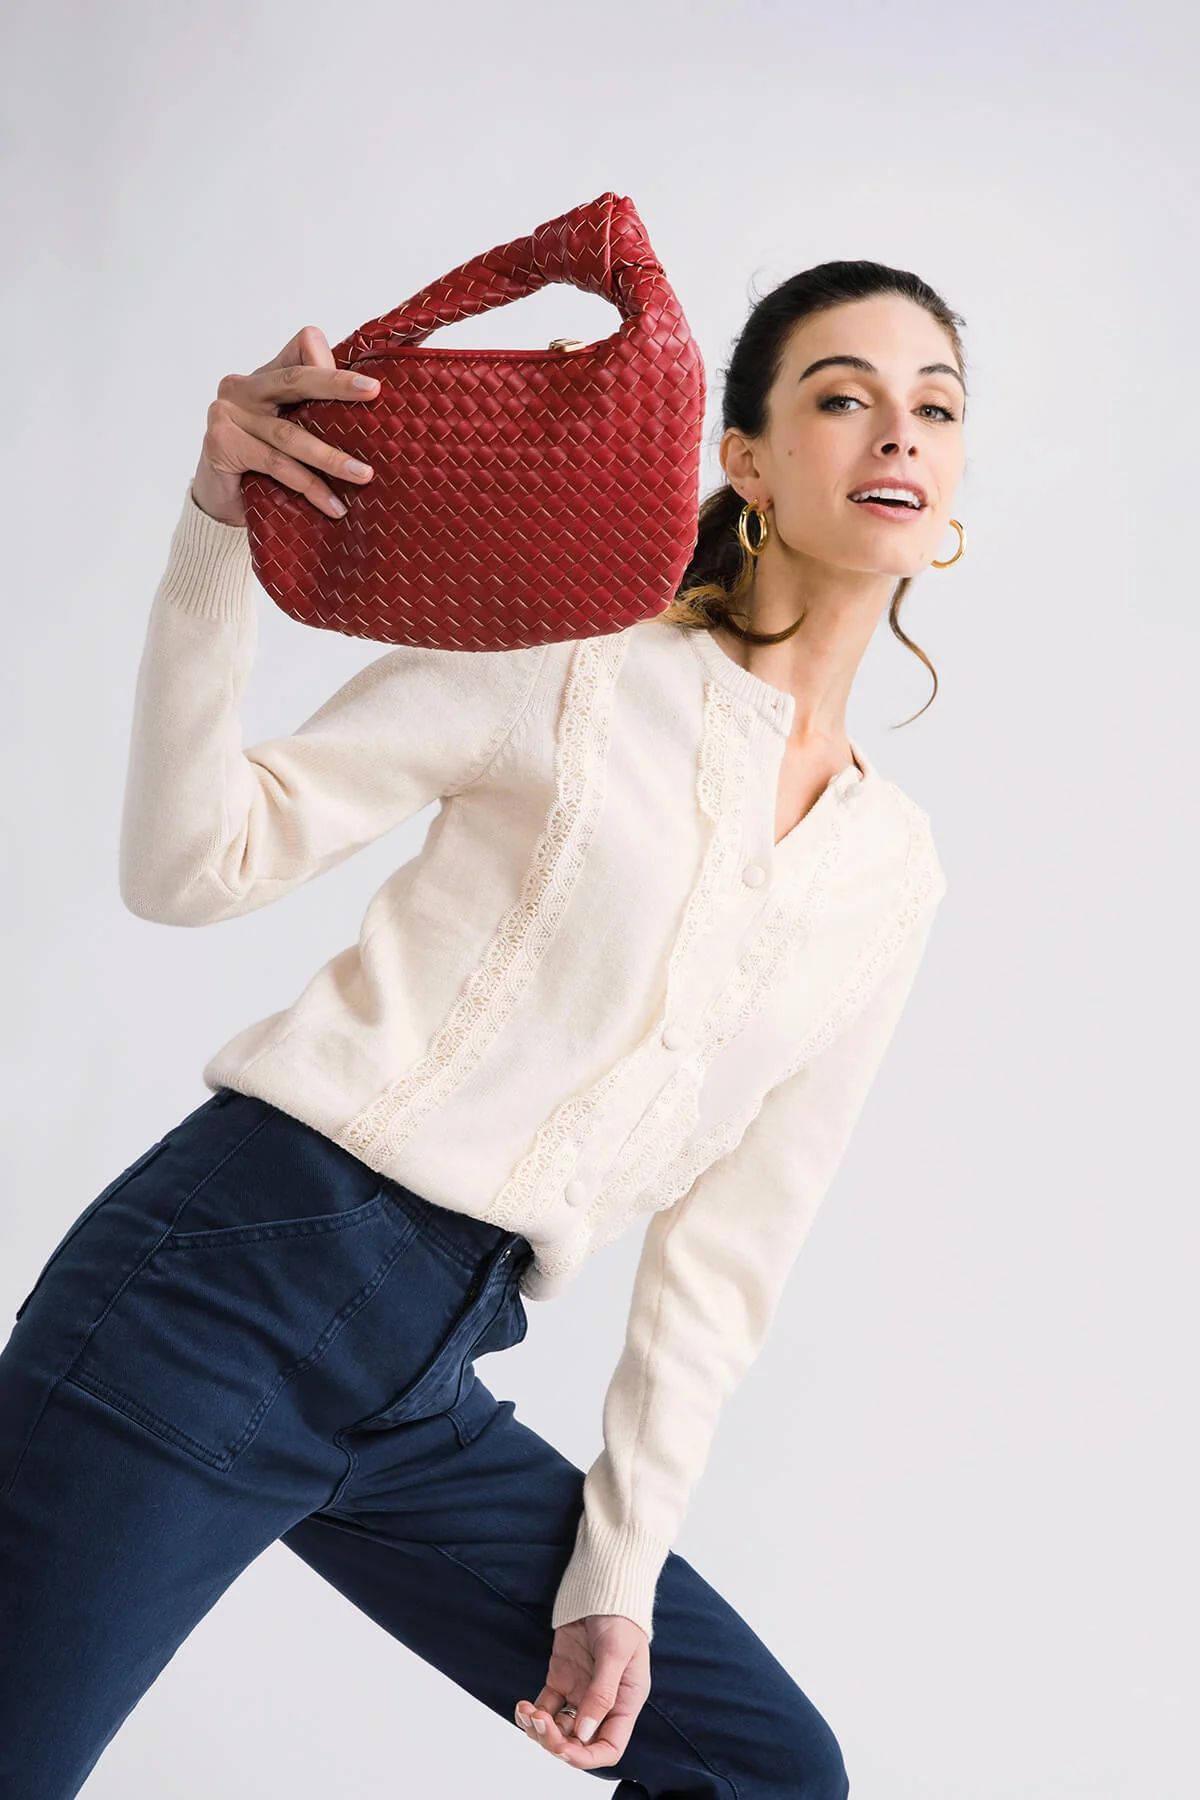 Melie Bianco Knotted Woven Vegan Leather Small Bag | Social Threads